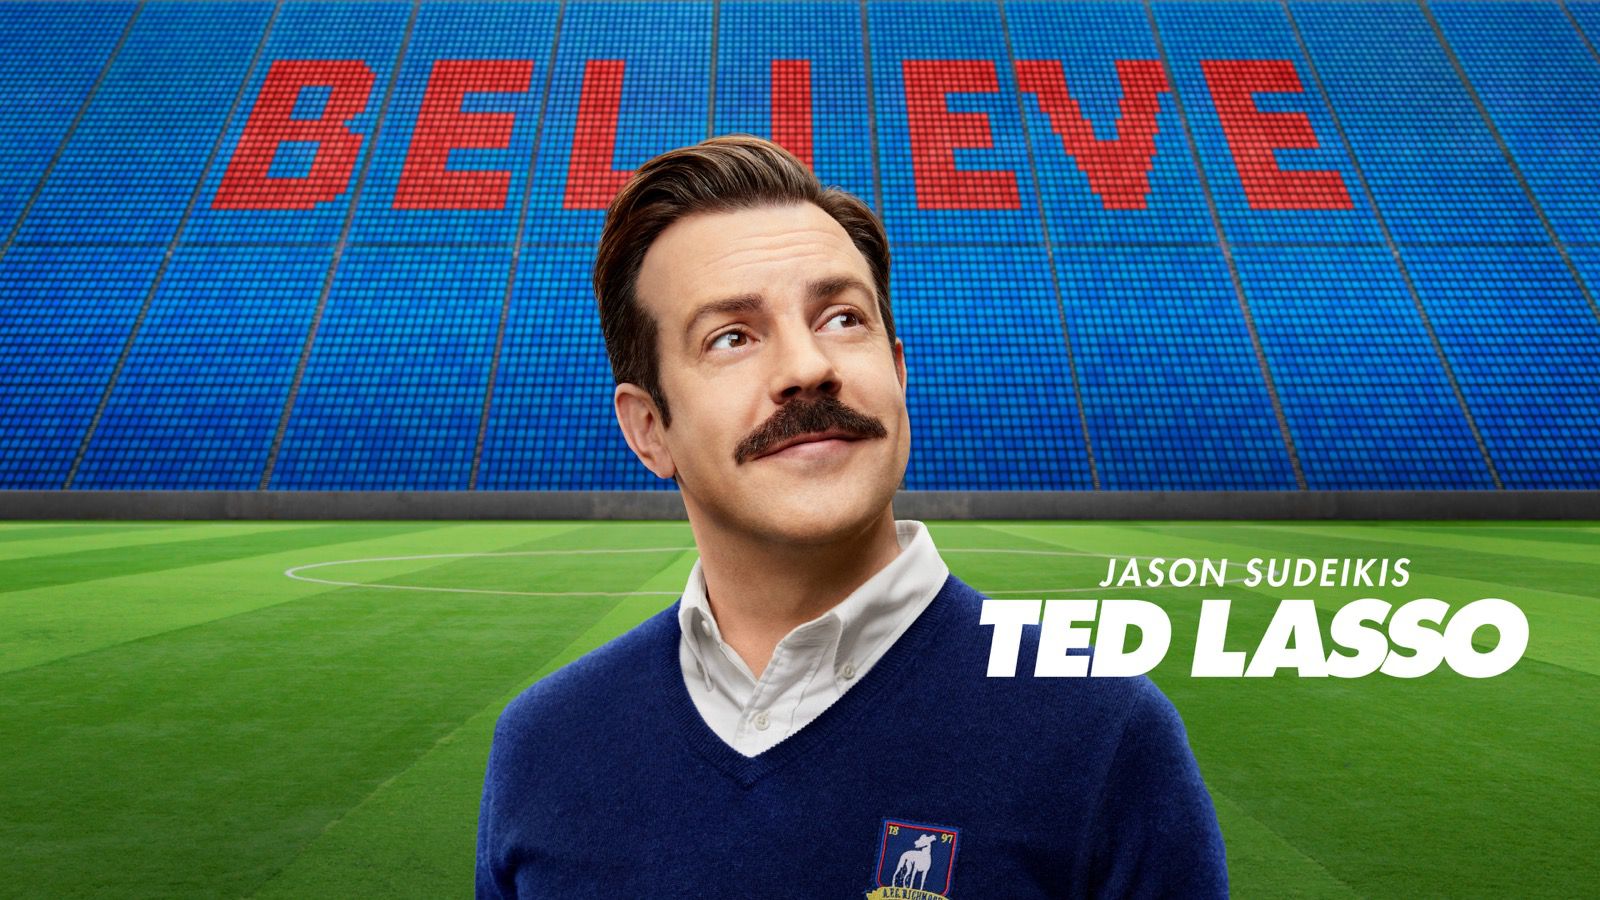  ted-lasso 